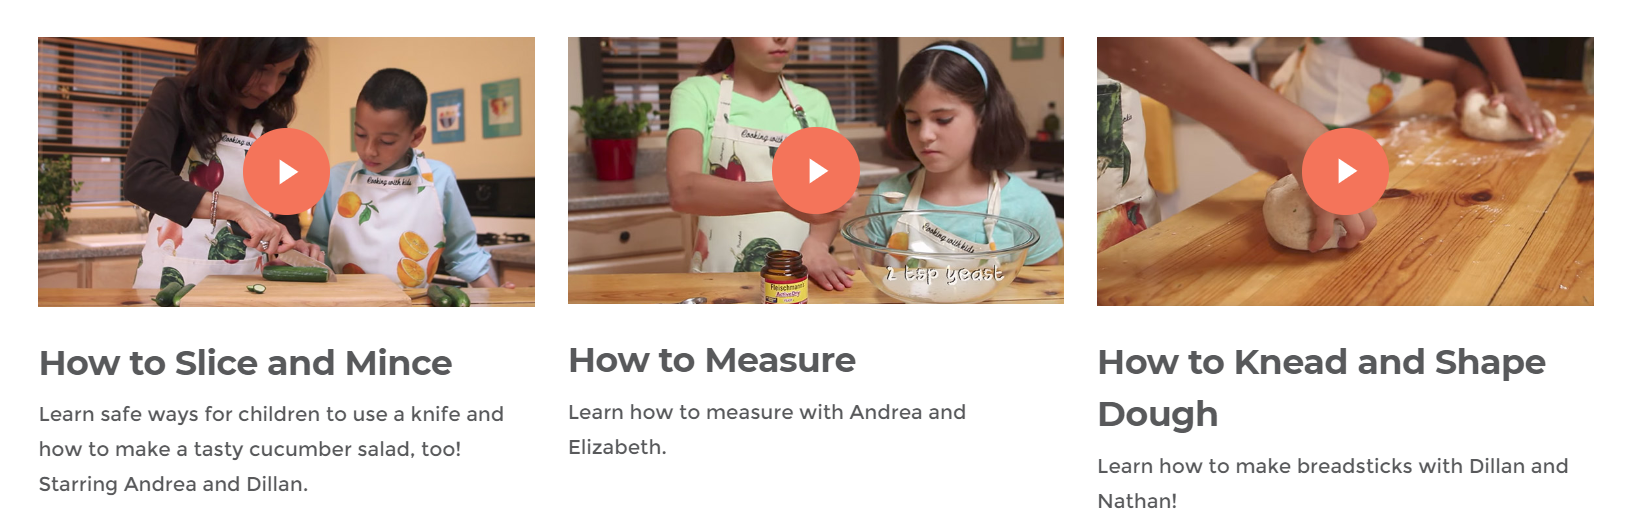 screenshot of three cooking videos from the Cooking with Kids site